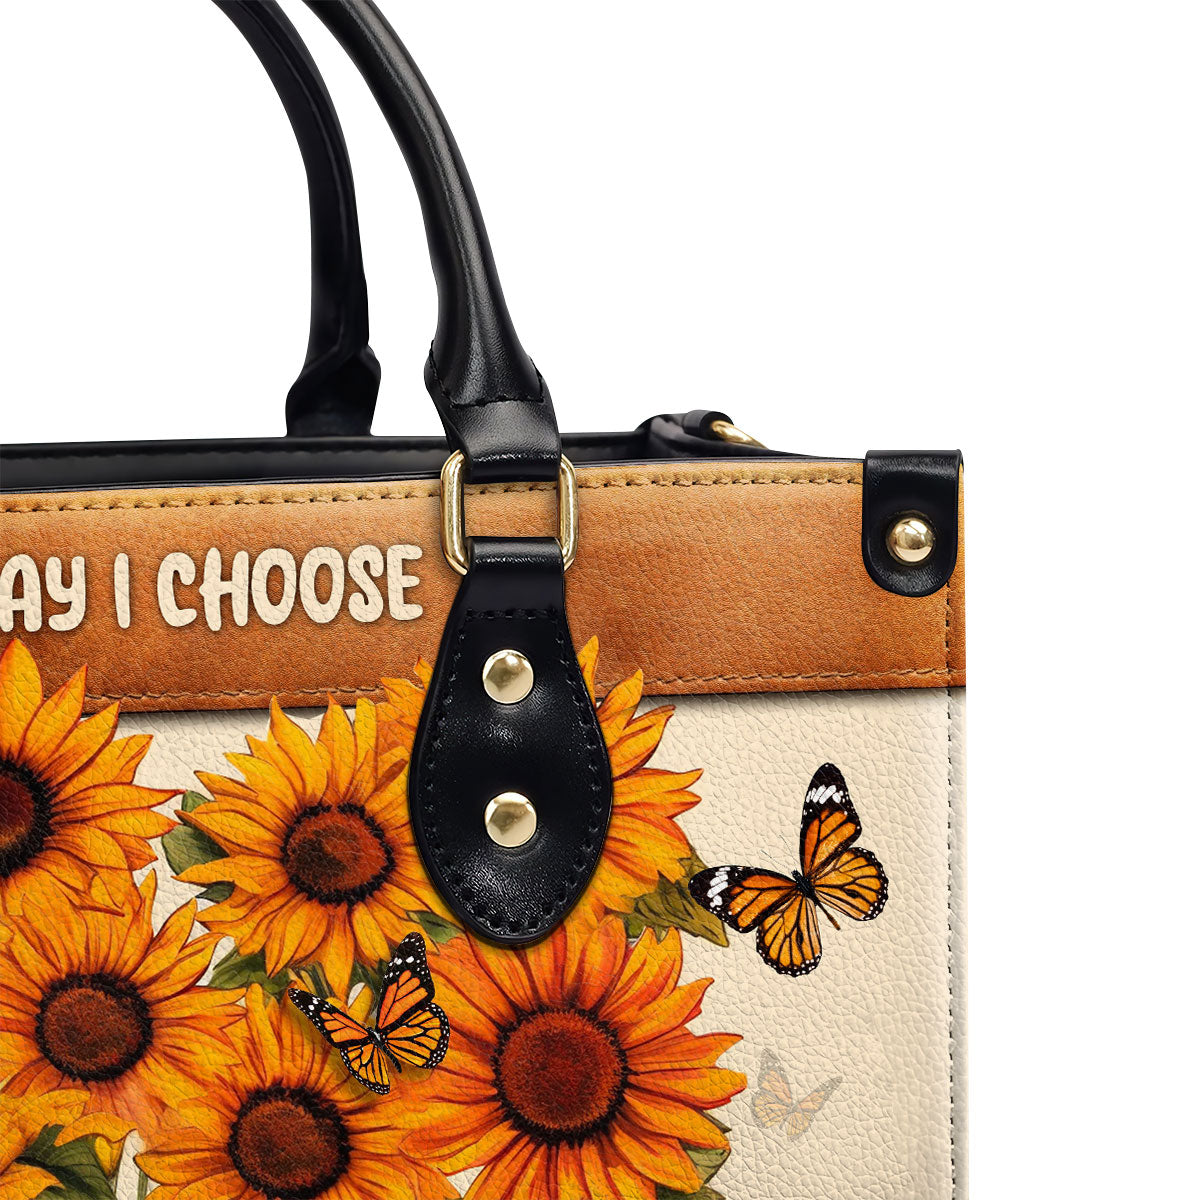 Today I Choose - Personalized Leather Handbag STB23